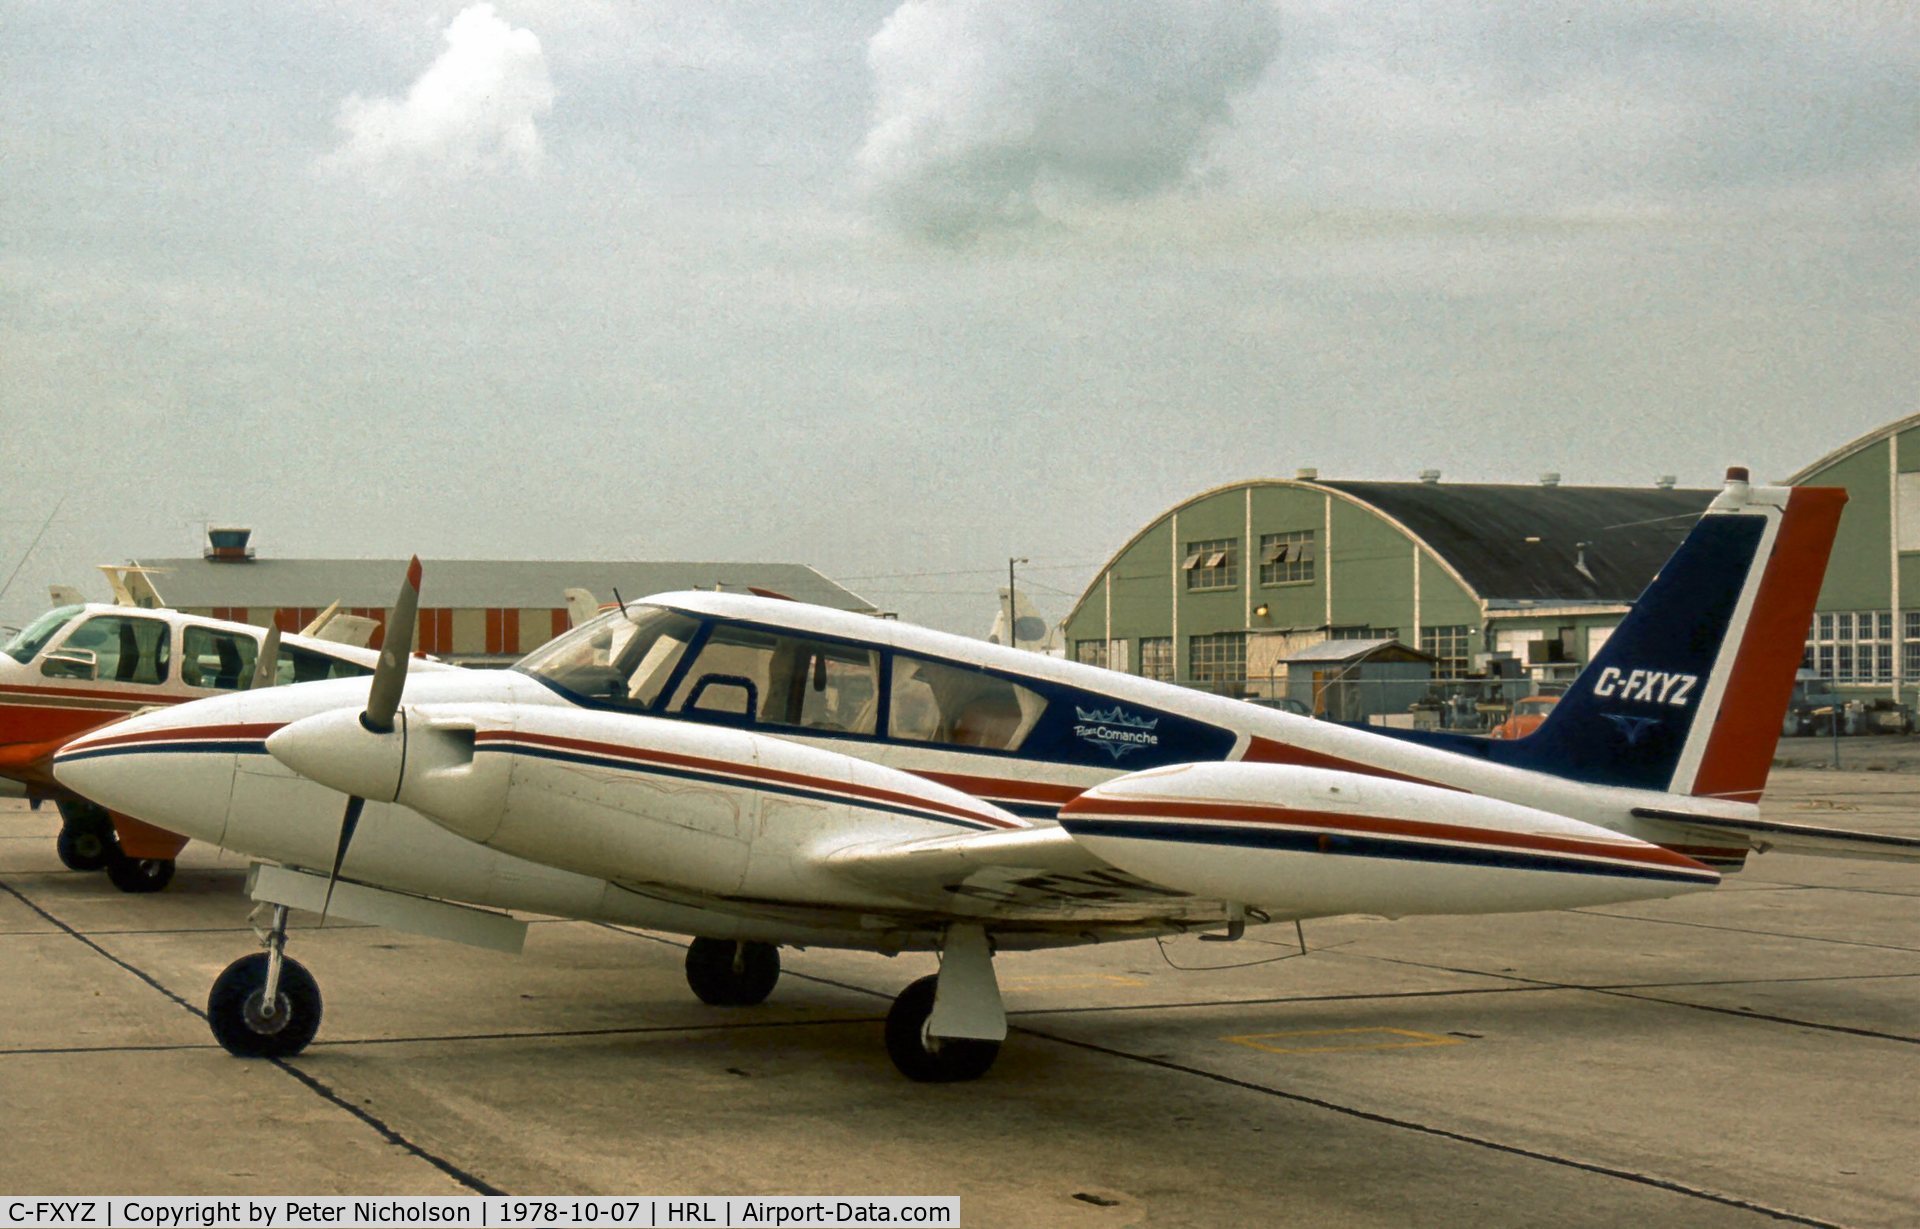 C-FXYZ, 1963 Piper PA-30-160 B Twin Comanche C/N 30-146, PA-30 Twin Comanche seen at Harlingen at the 1978 Confederate Air Force's Airshow.